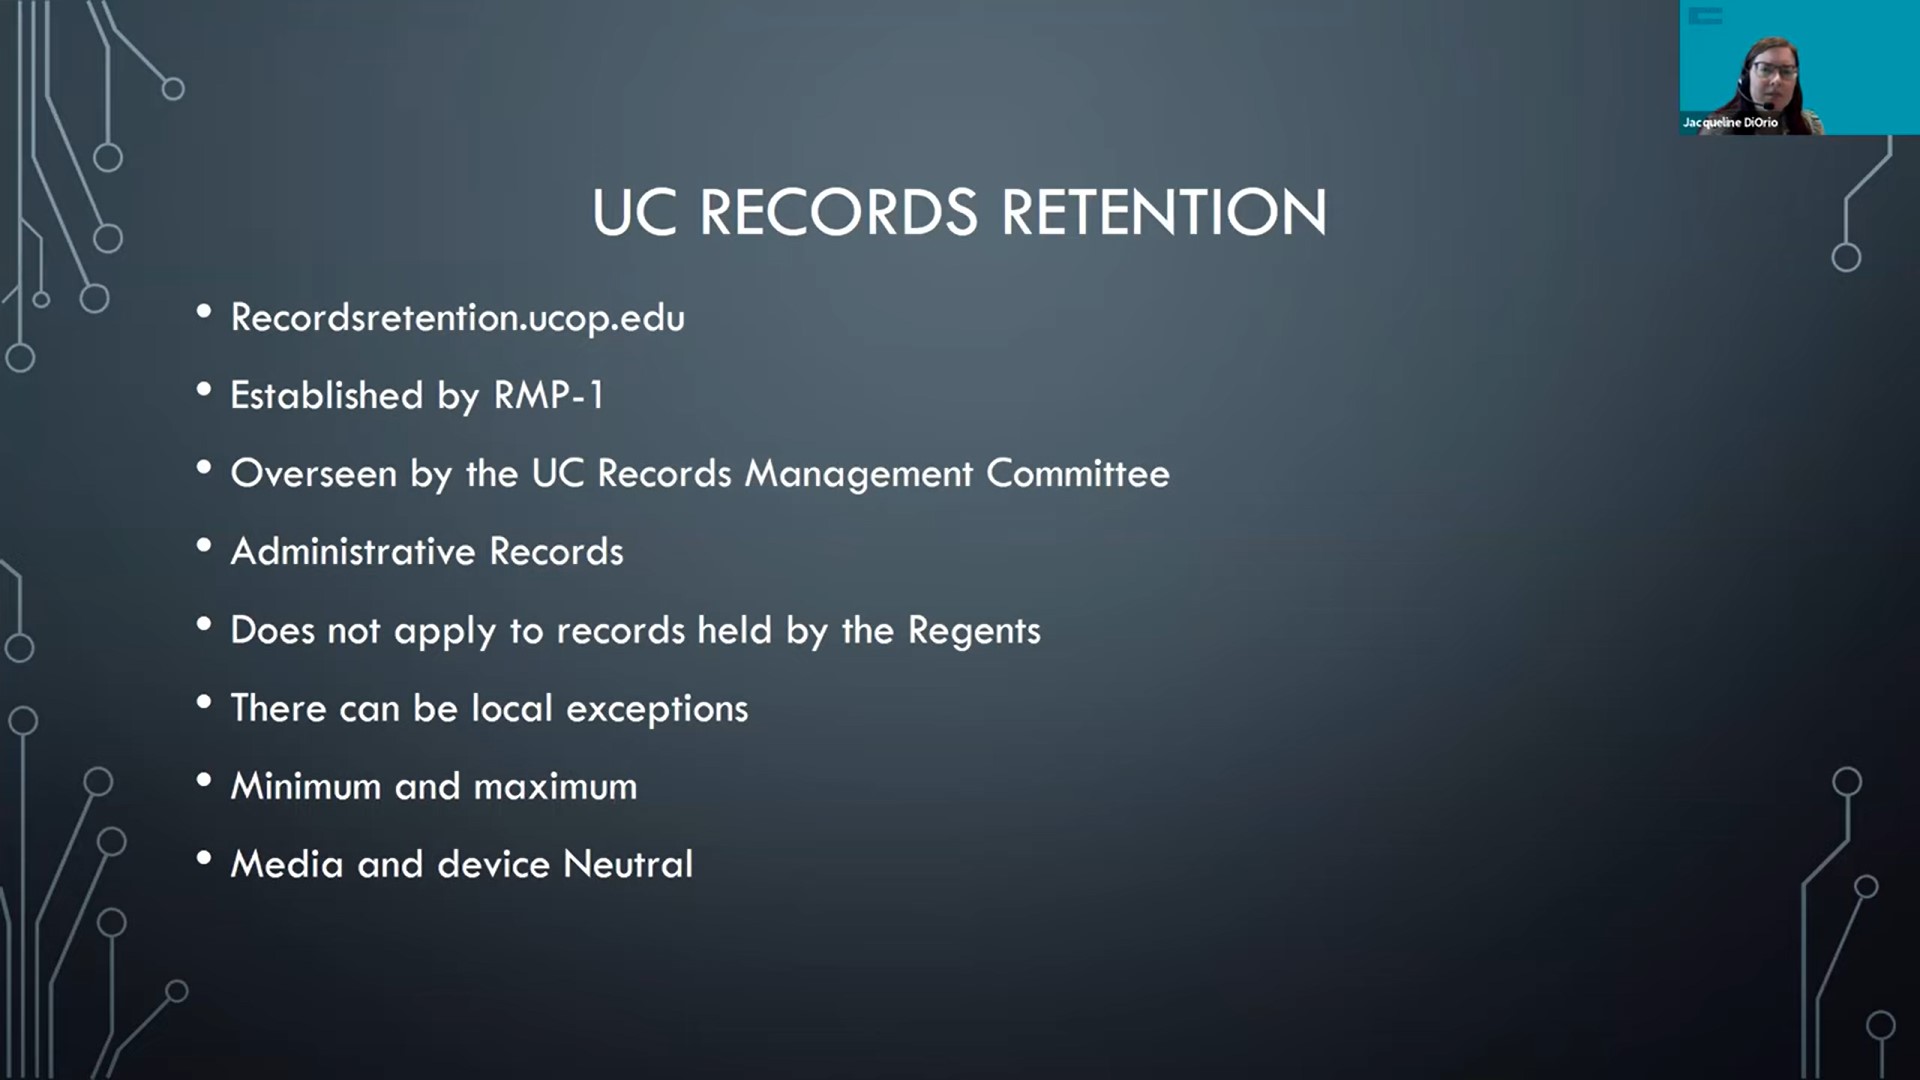 Retention is an exact time period - YouTube